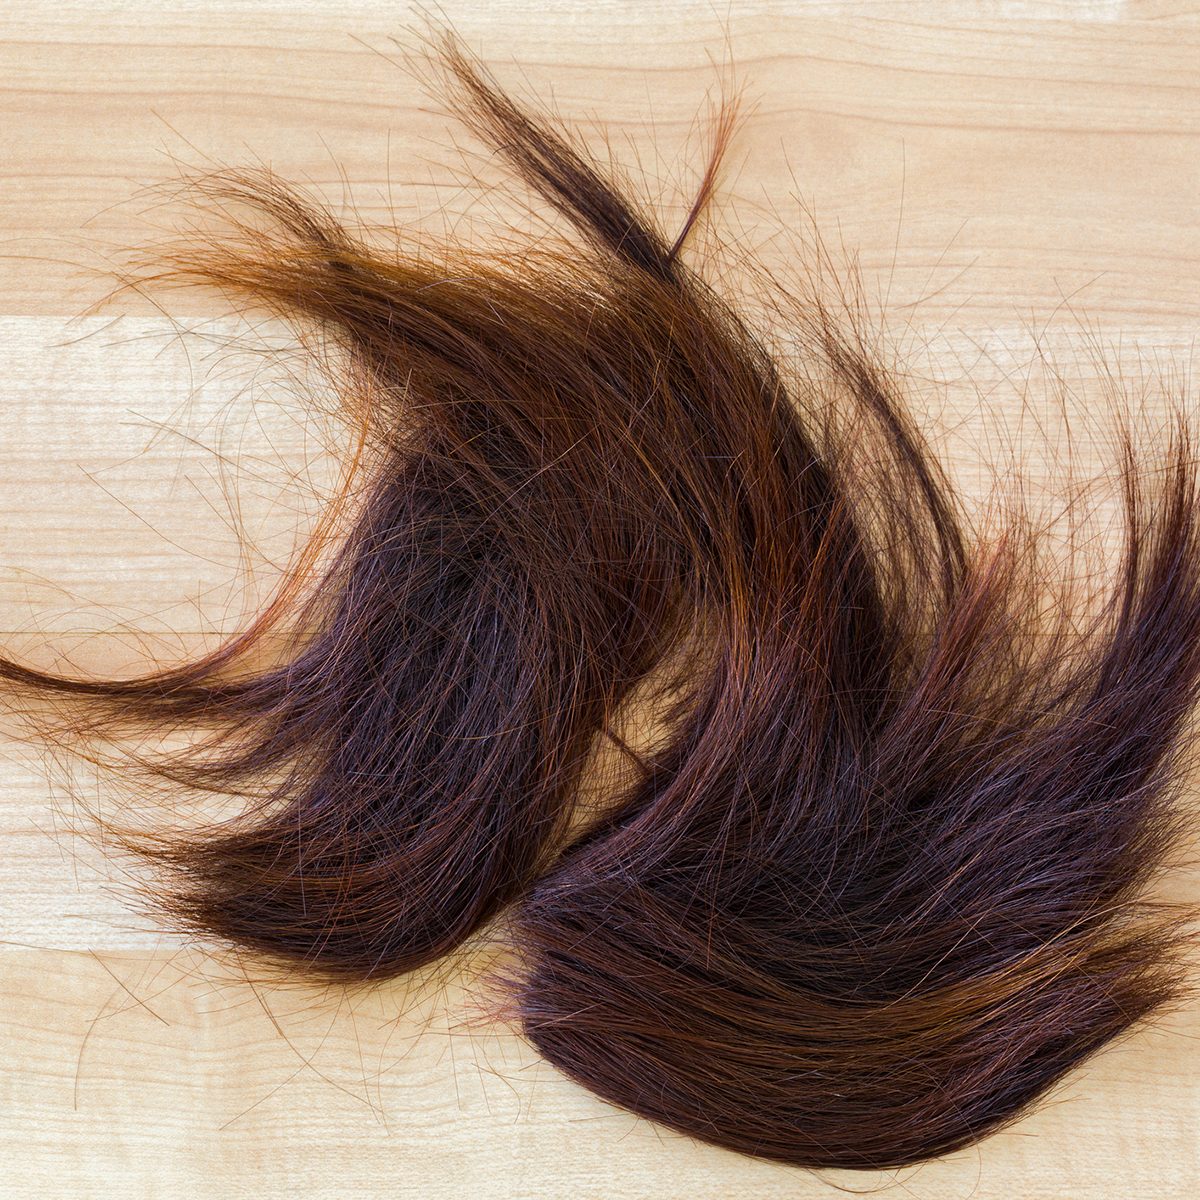 Bunch of trimmed cut off reddish brown hair on wooden floor at hairdressing salon, with copyspace